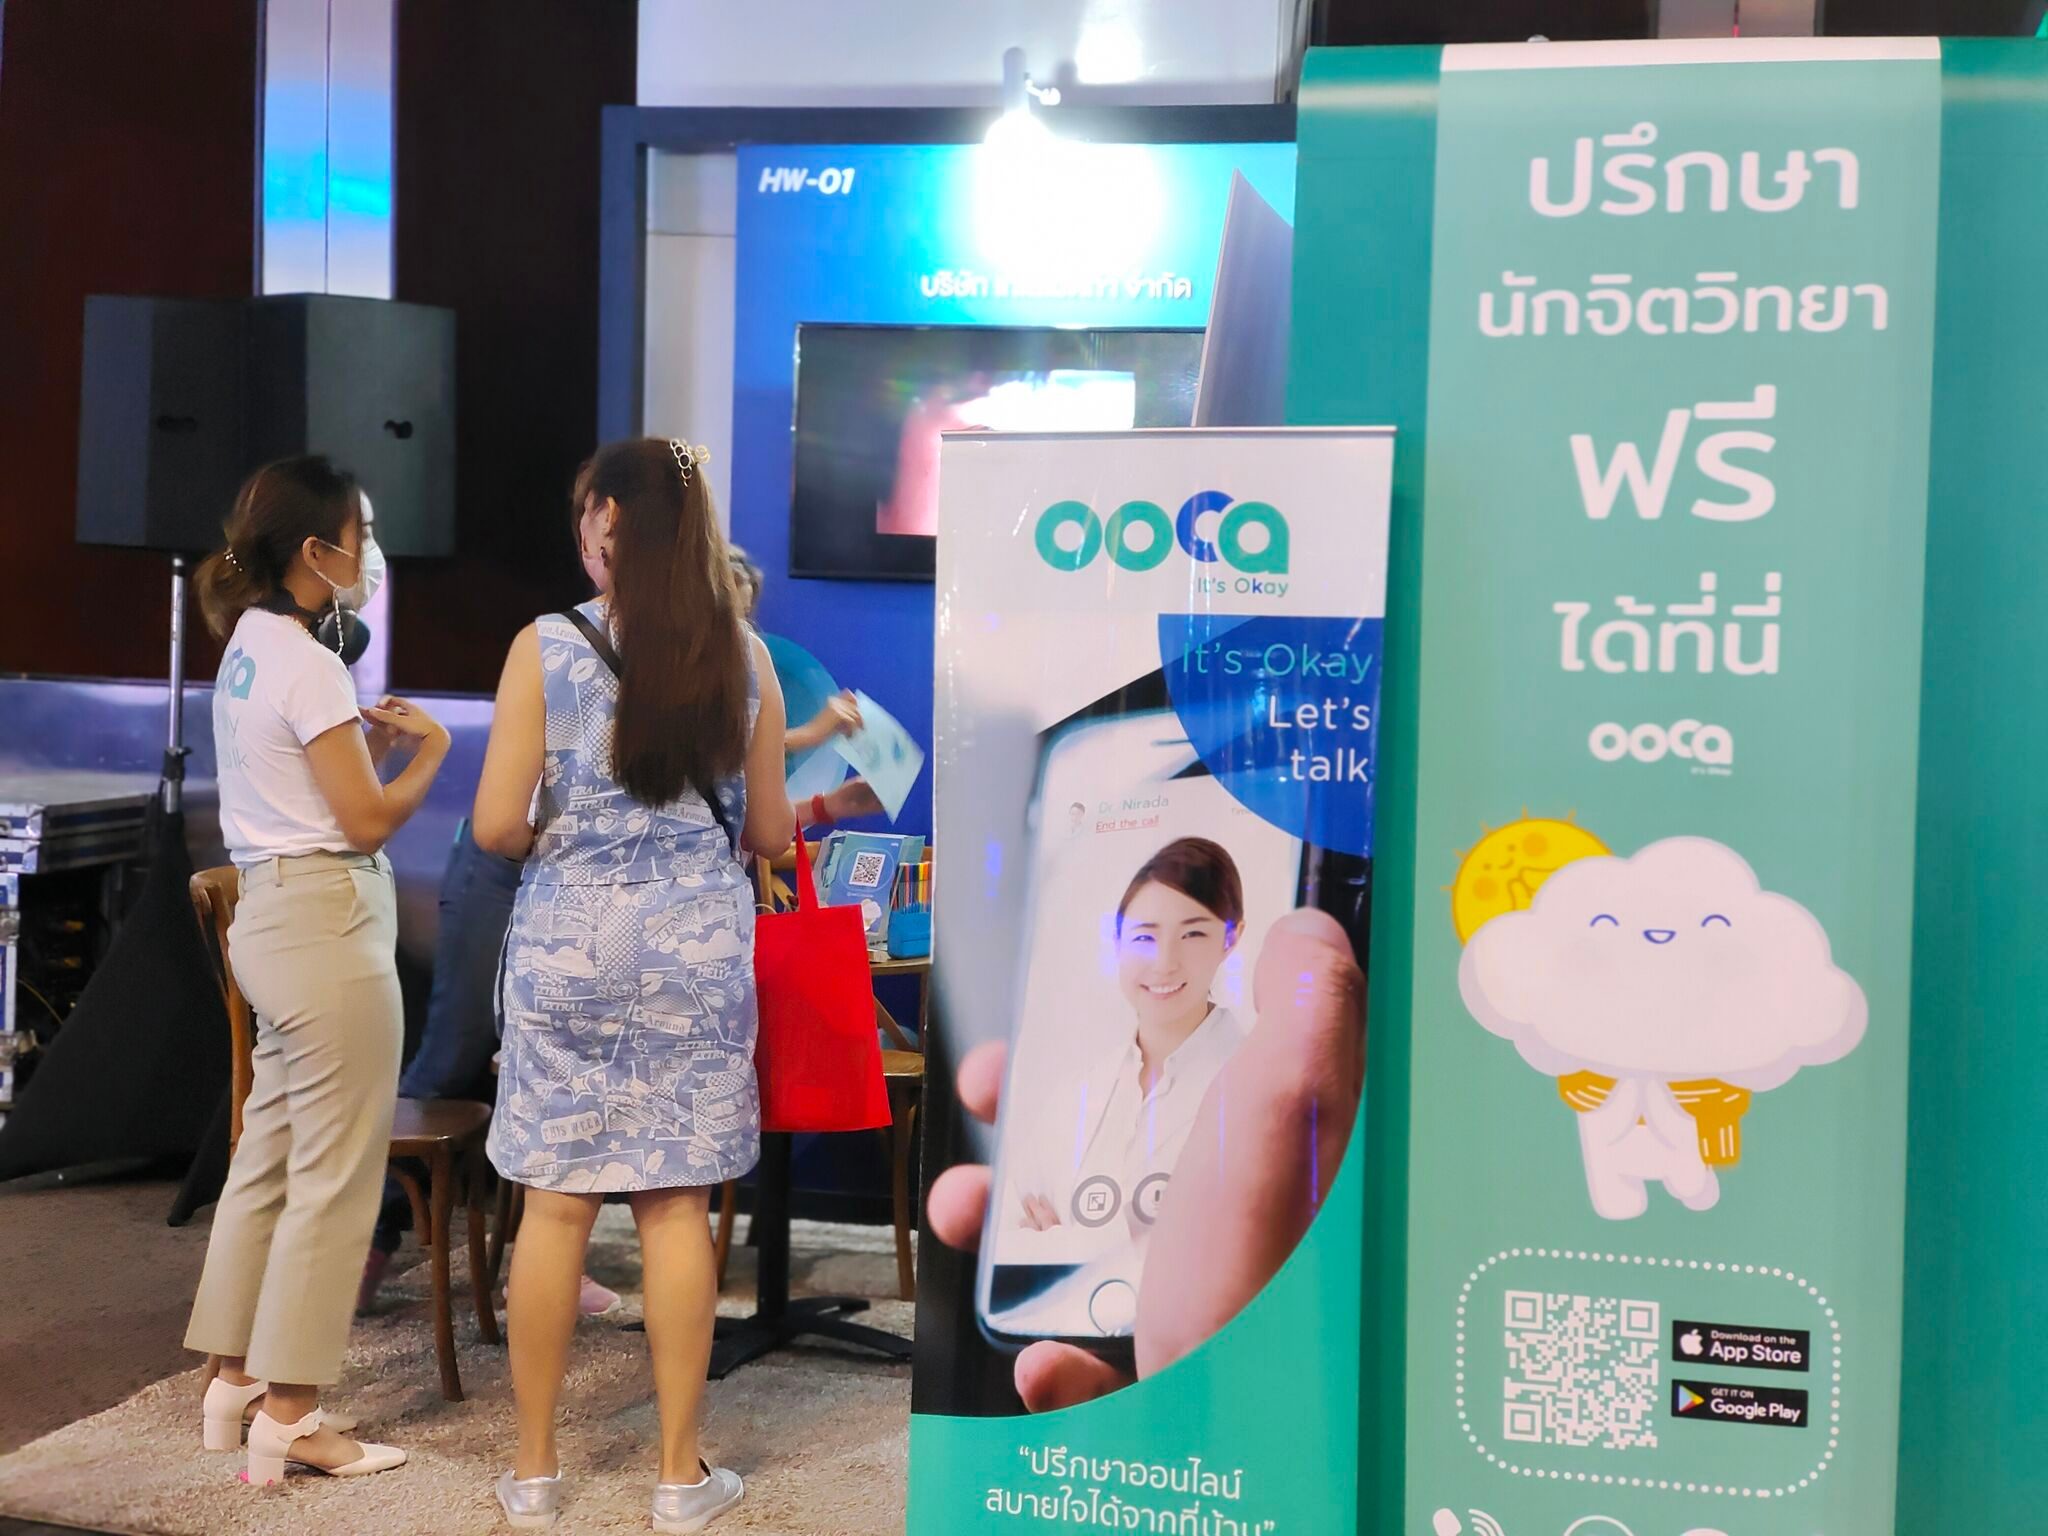 Thailand Digest: Telemental app ooca closes Series A funding; New bourse coming up for SMEs, startups